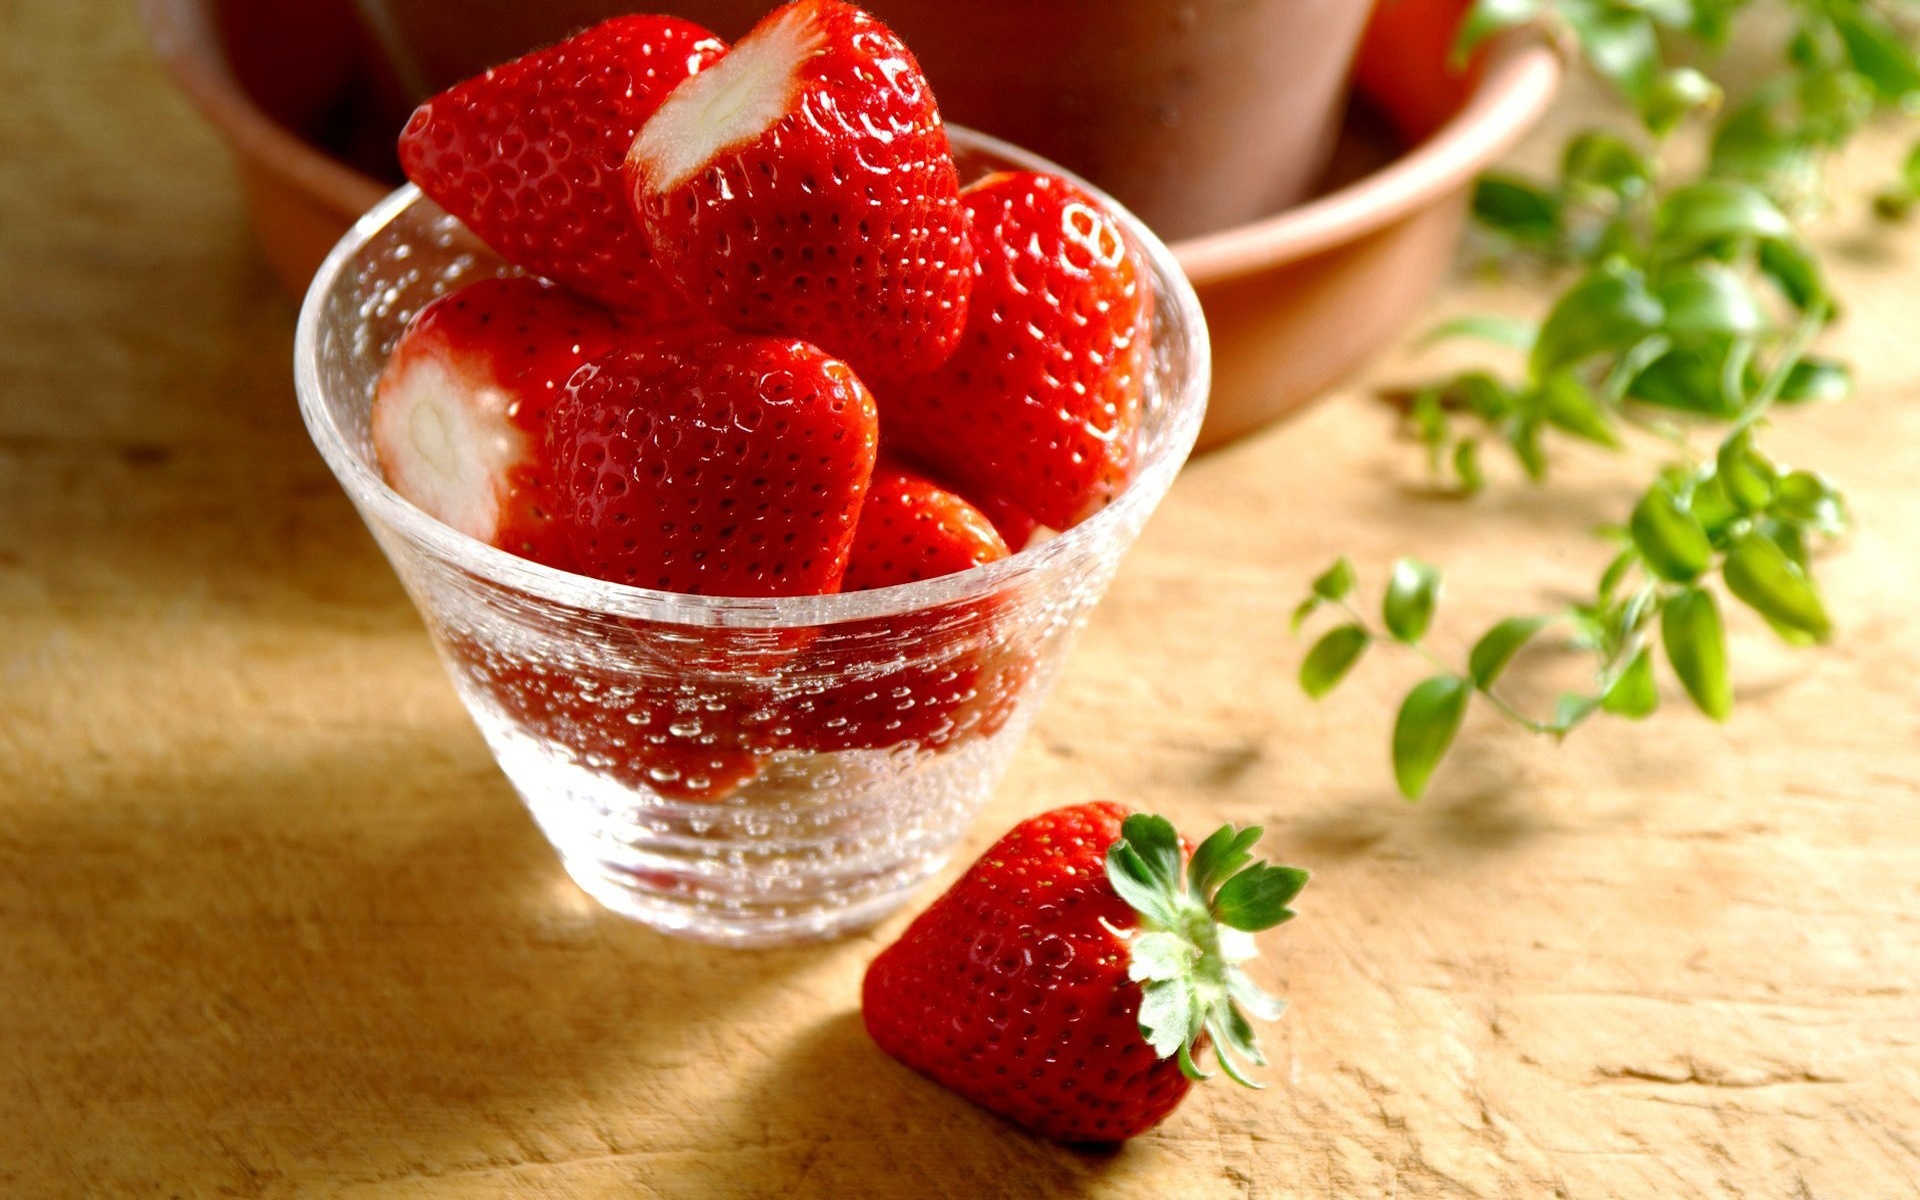 Wallpapers sweet table strawberry on the desktop